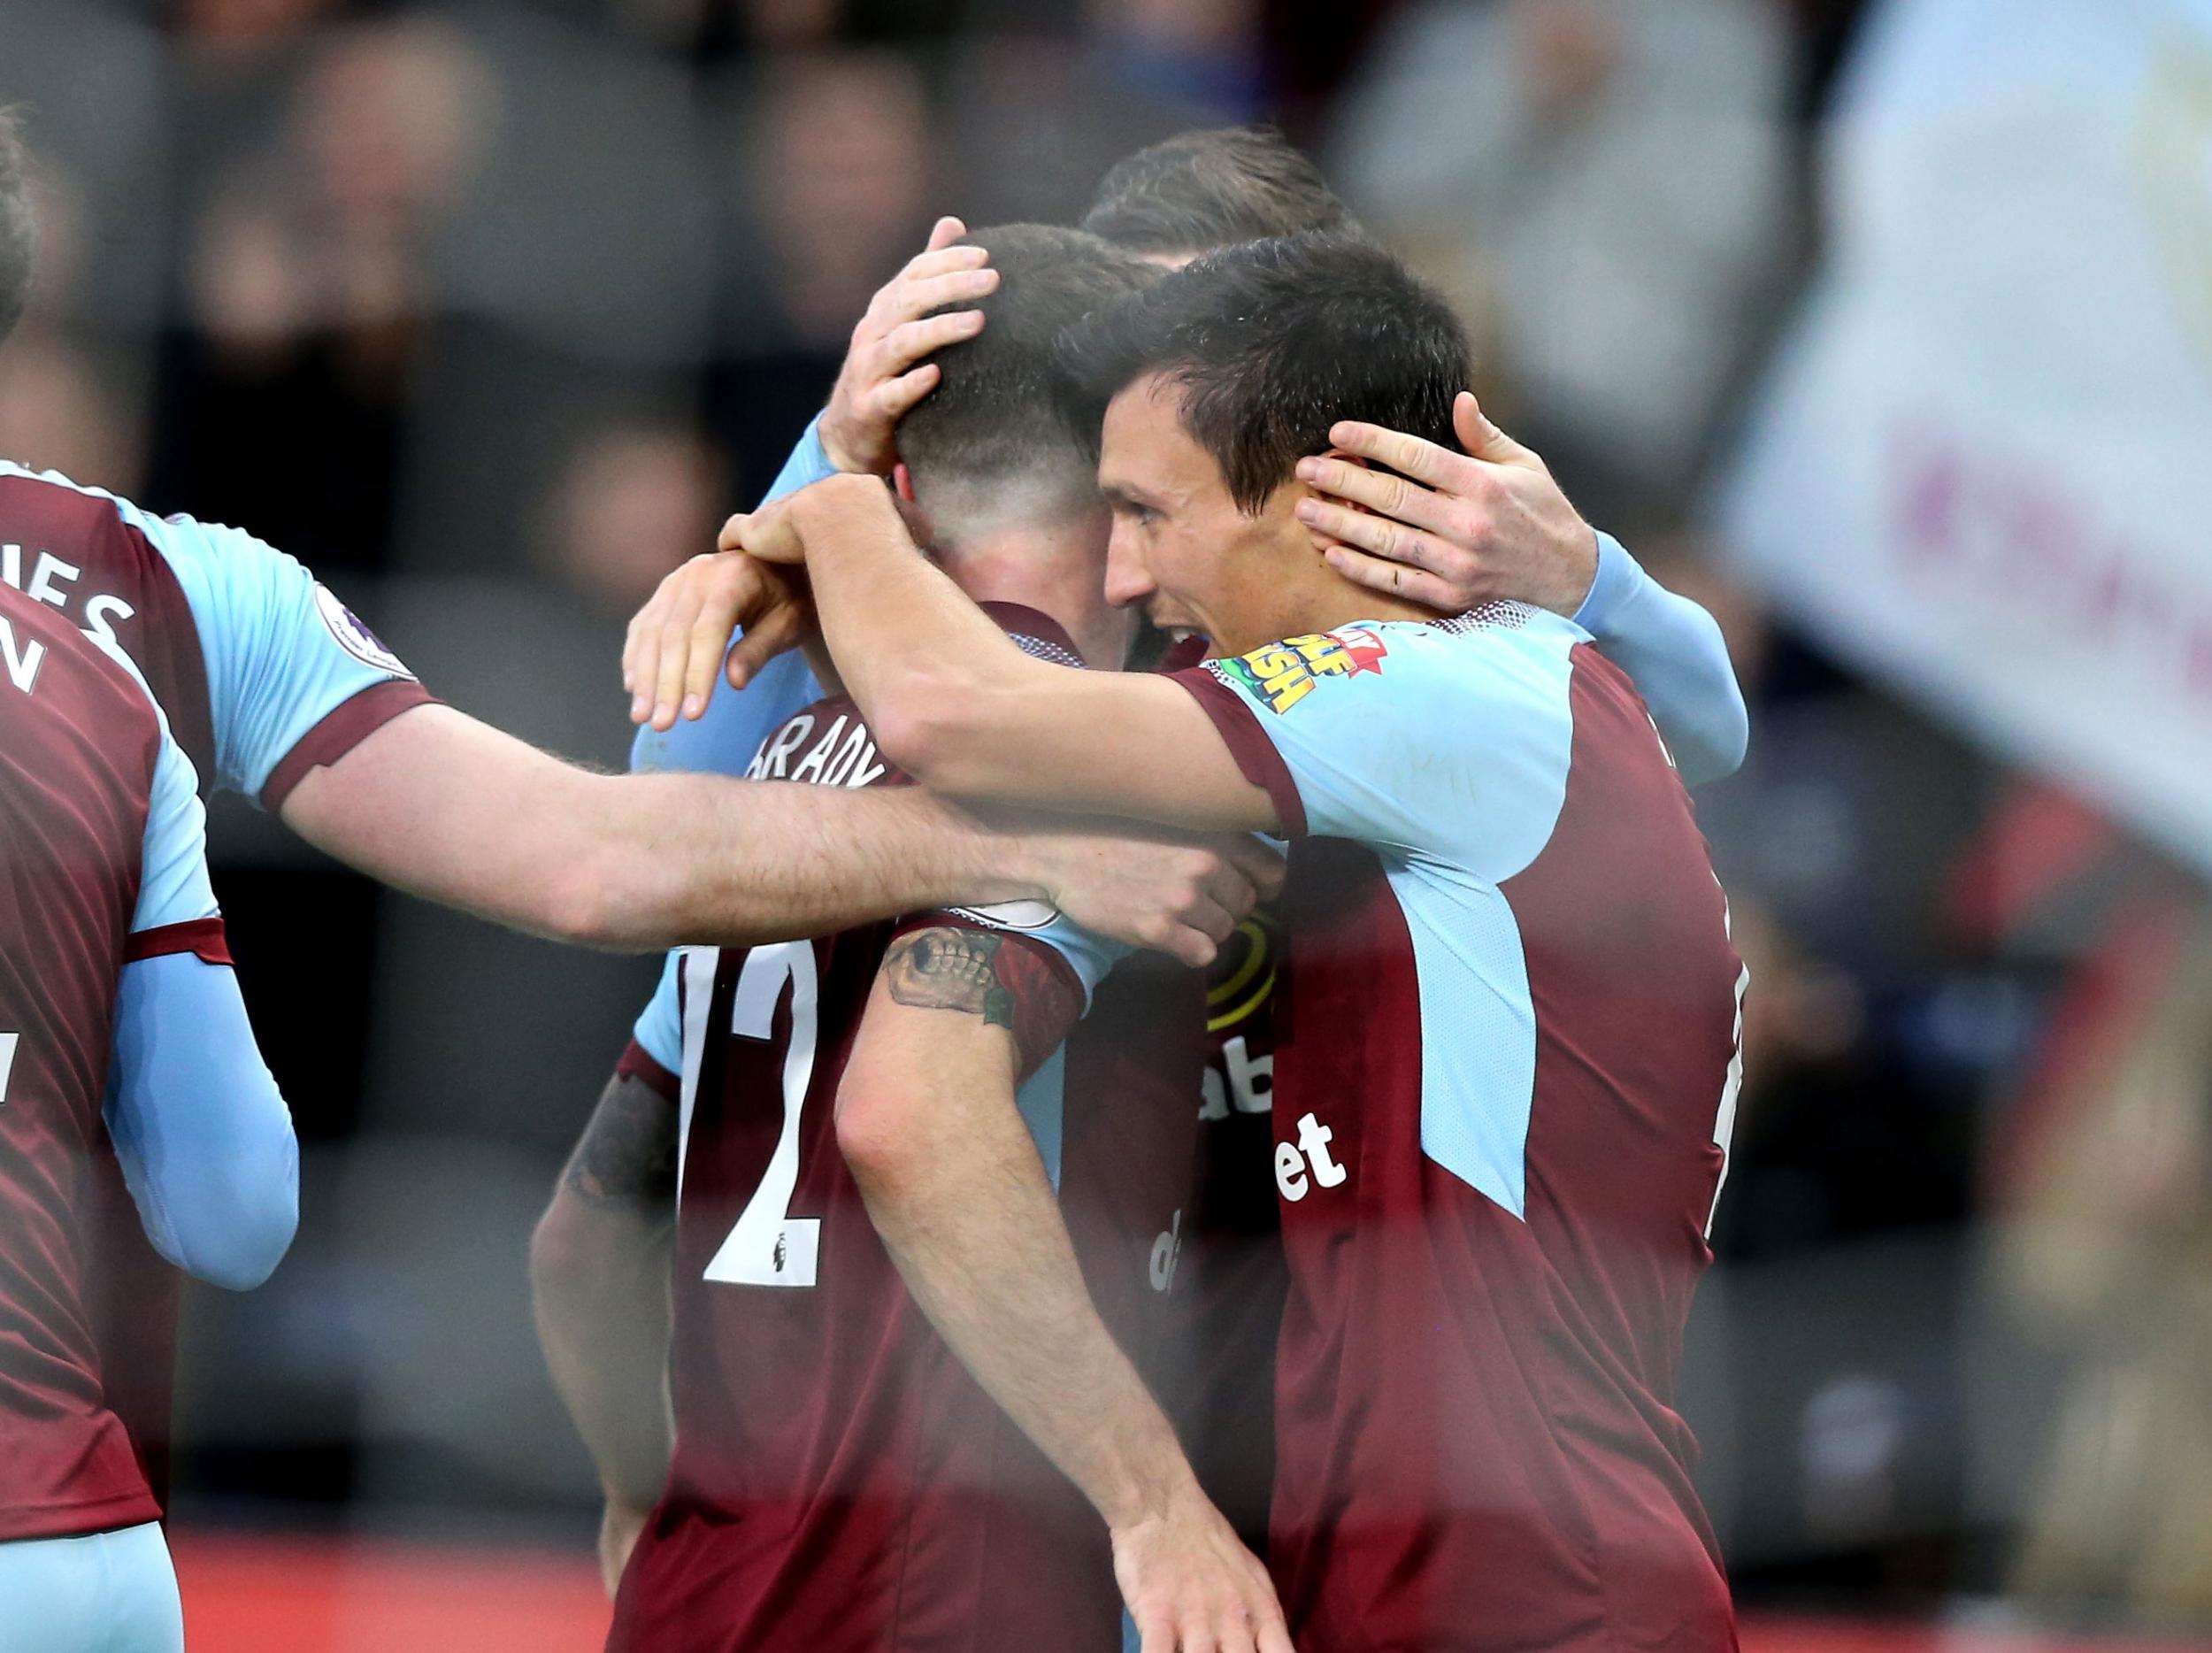 Jack Cork comes back to haunt former club Swansea as Burnley heap yet more pressure on Paul Clement